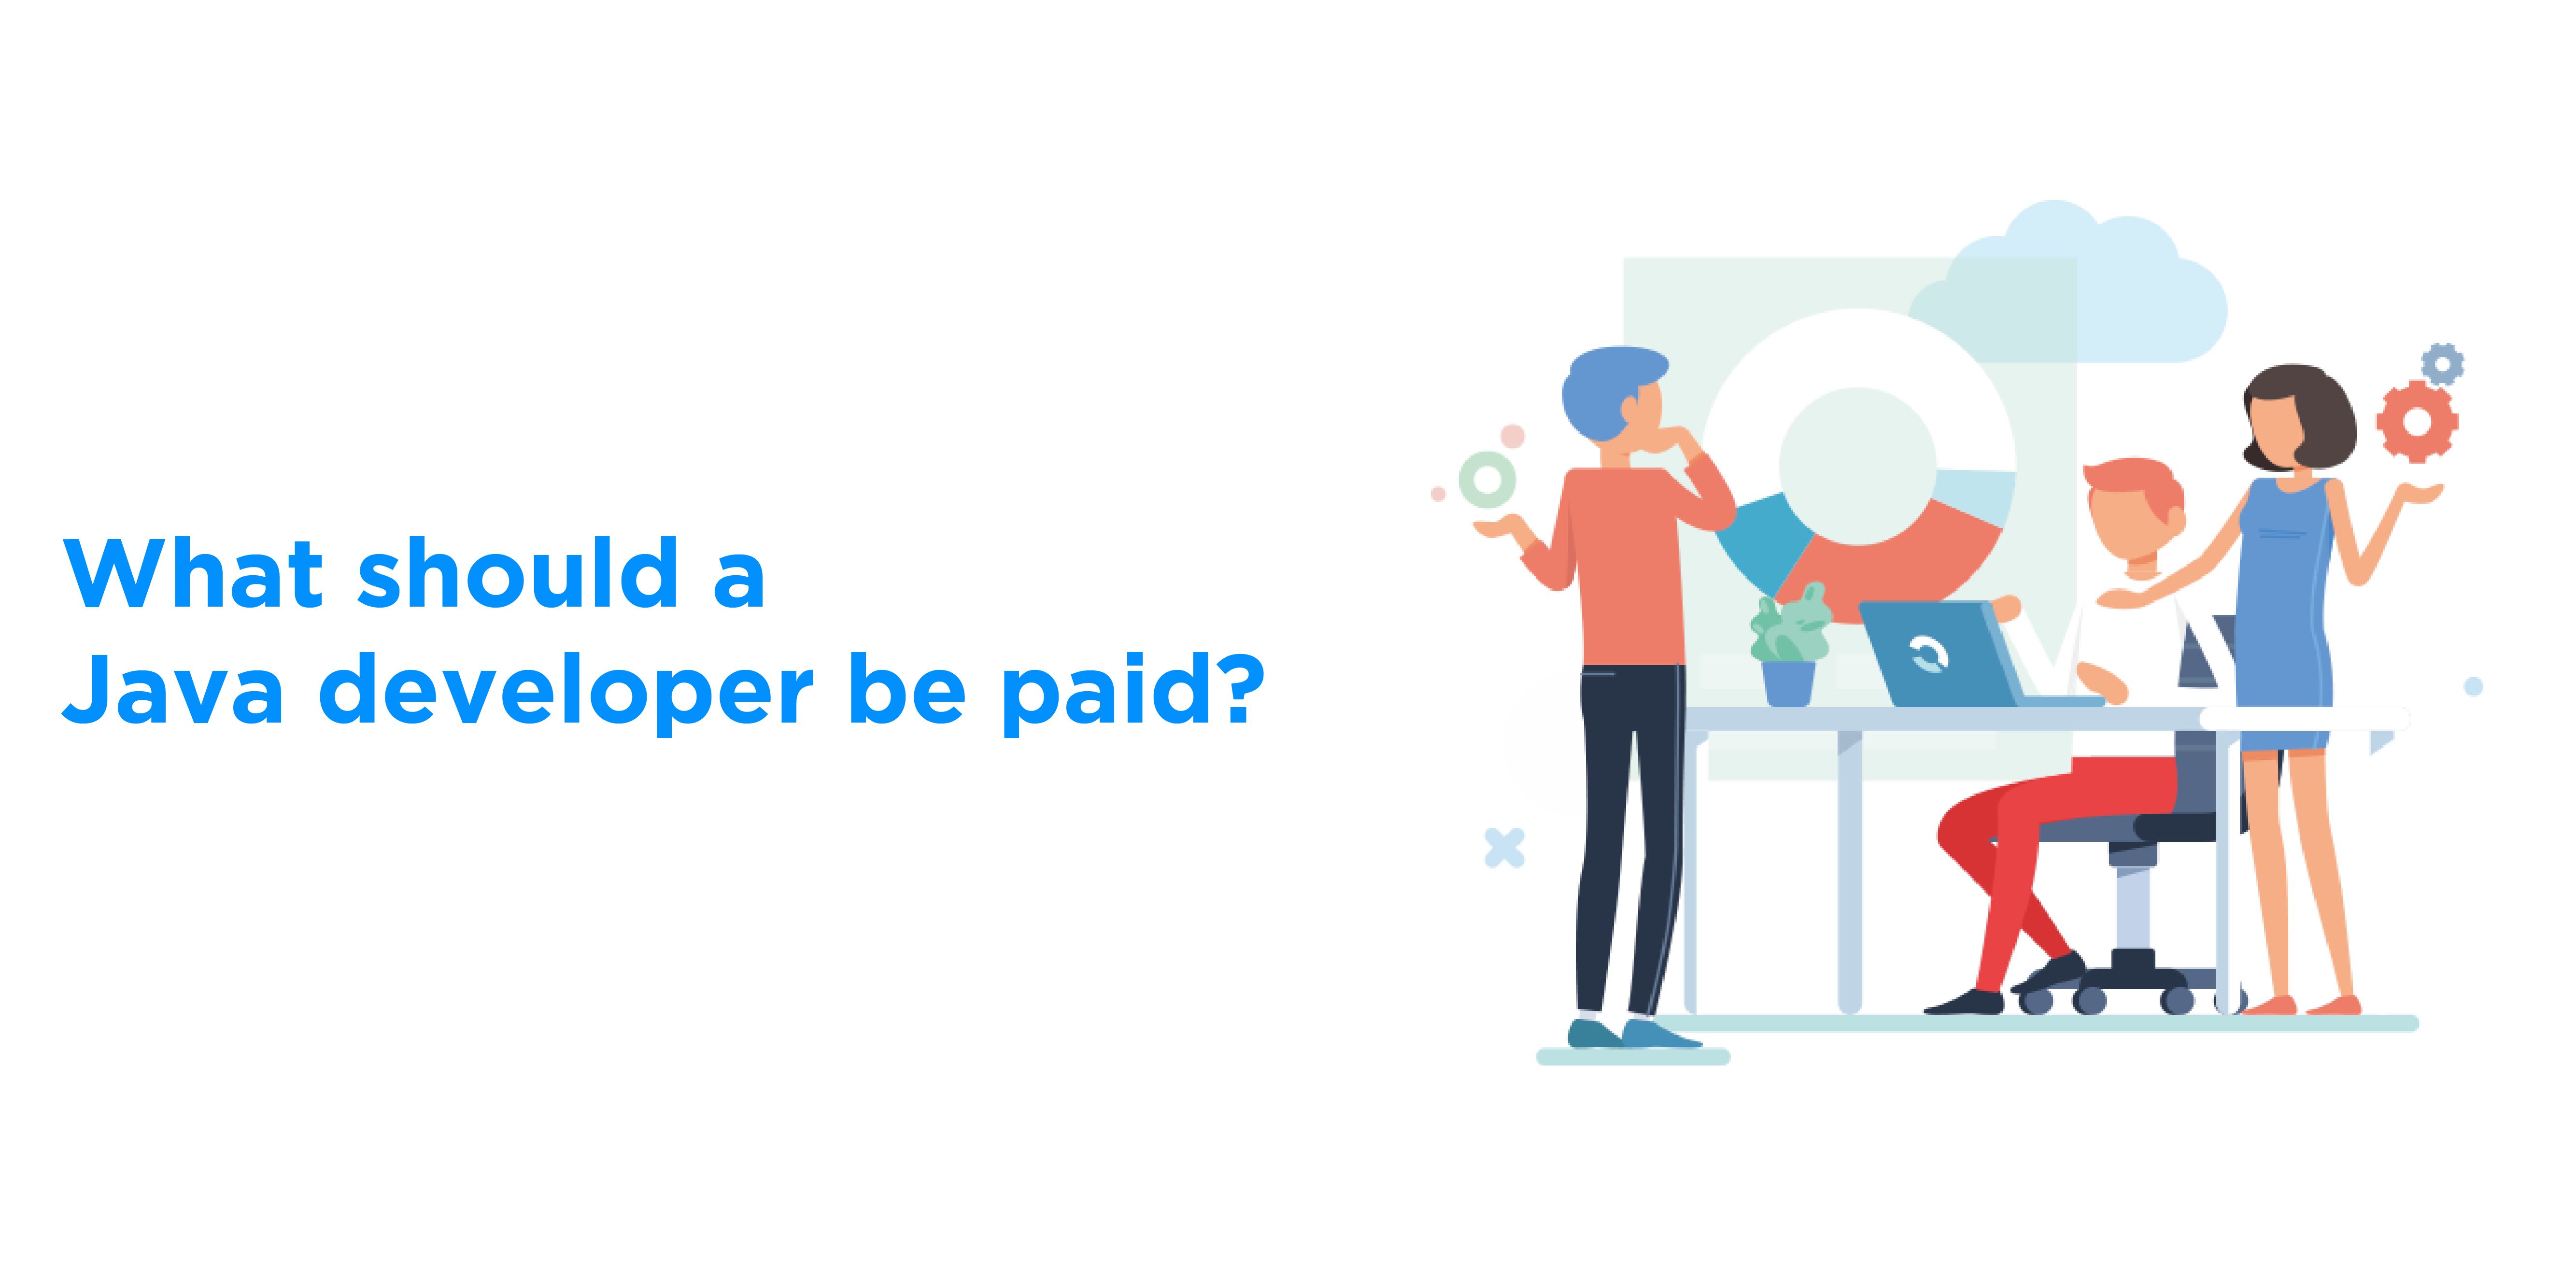 What should a Java developer be paid?